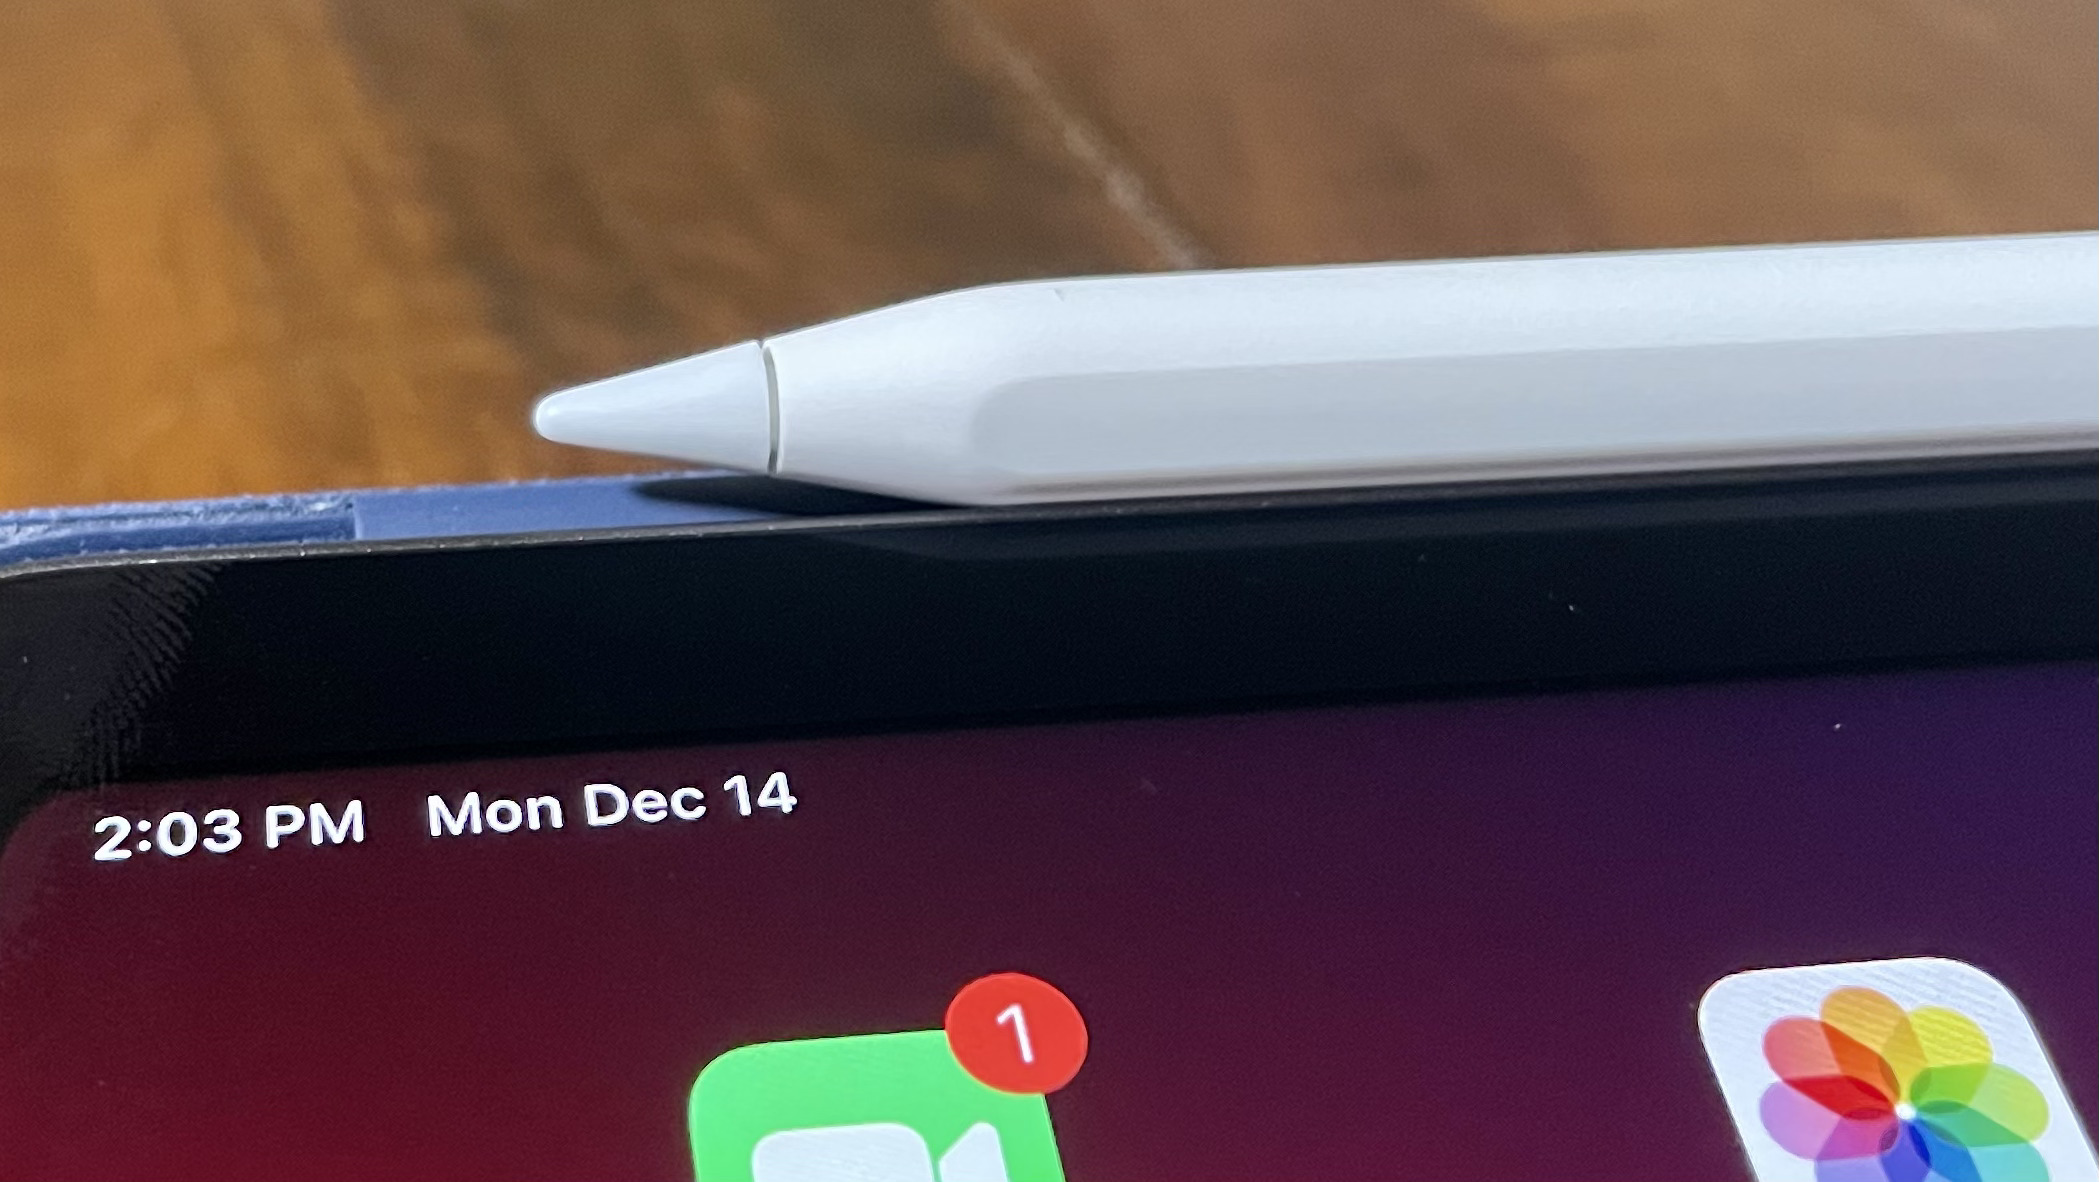 Pair Apple Pencil 2nd Generation To Your Ipad Upphone